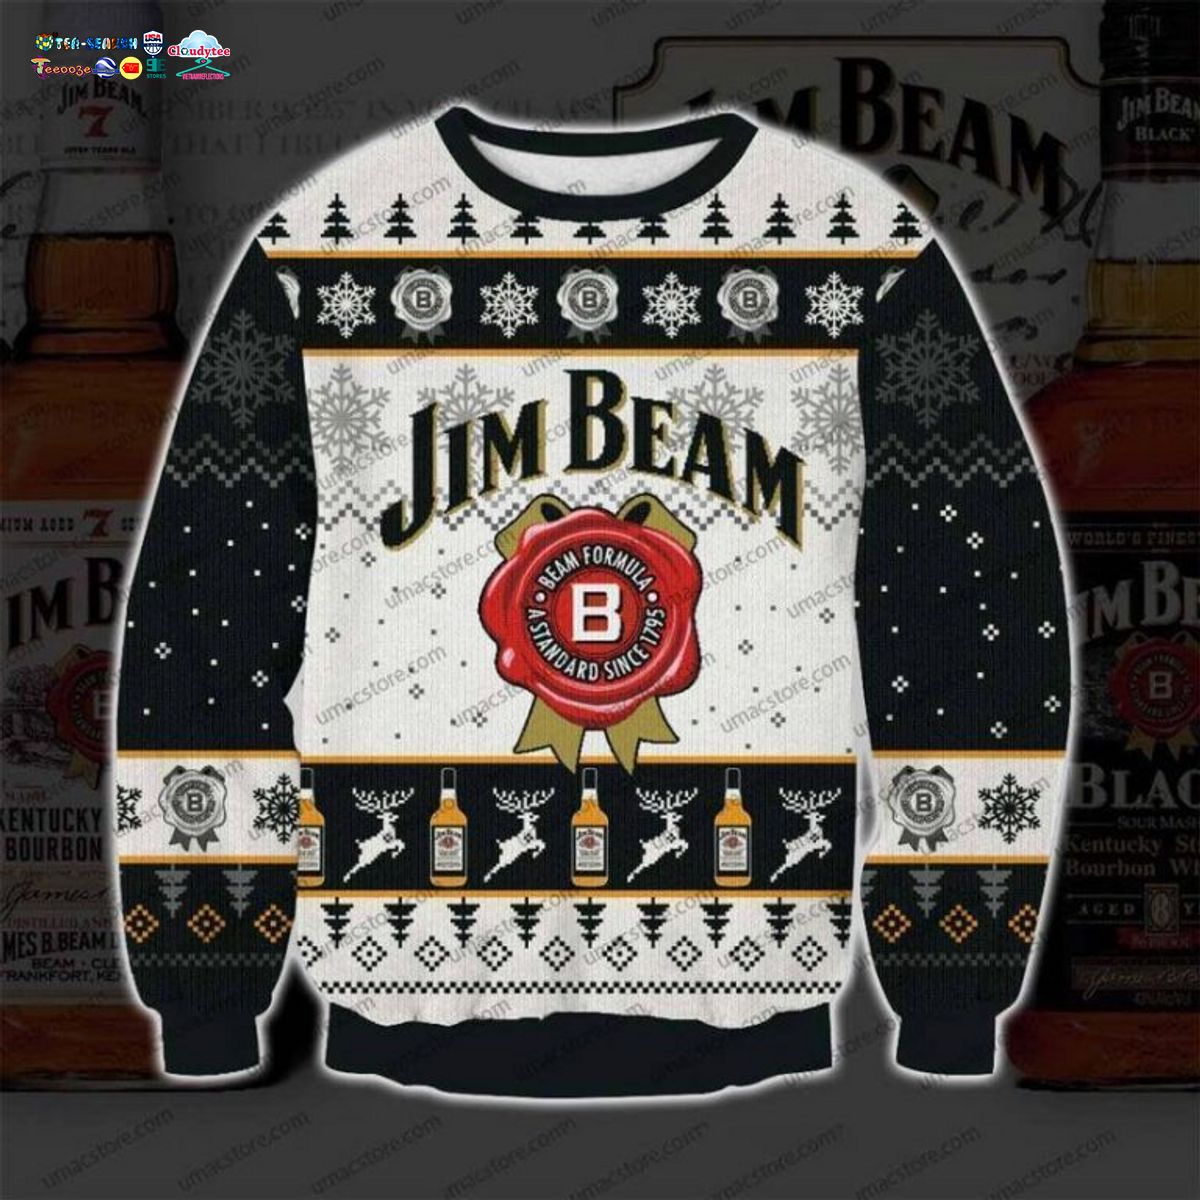 Jim Beam Ugly Christmas Sweater - Best picture ever